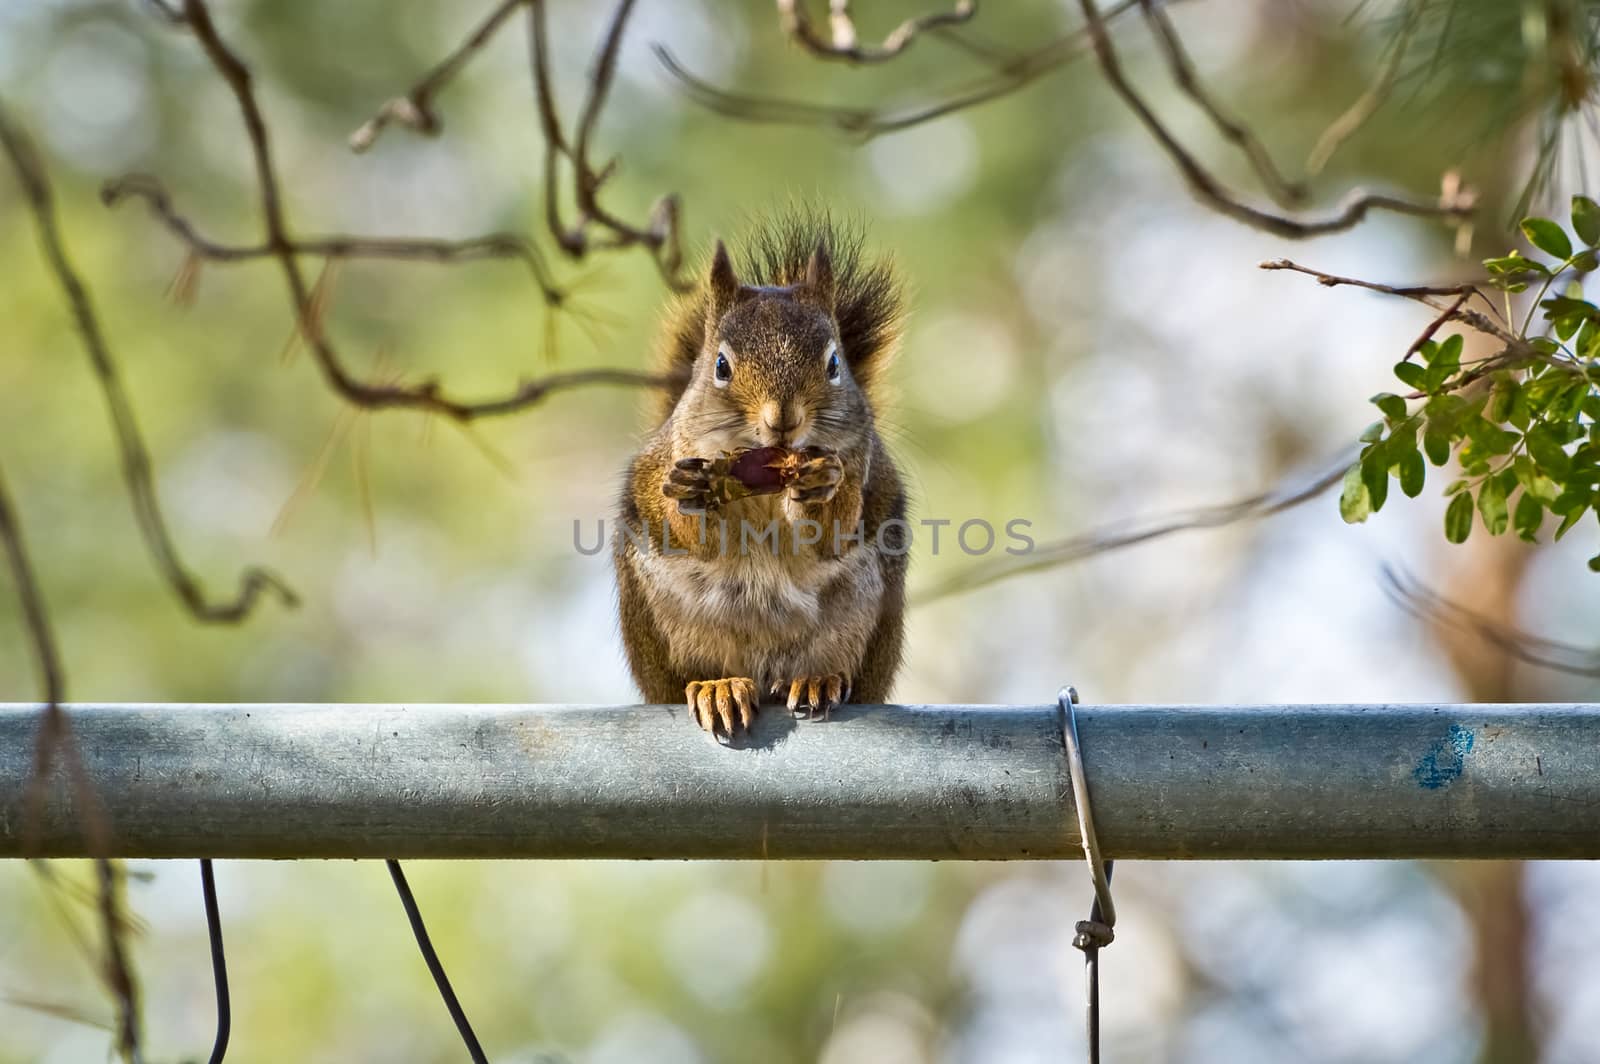 Squirrel eating an acorn in a blur of motion while perched on a nearby fence.